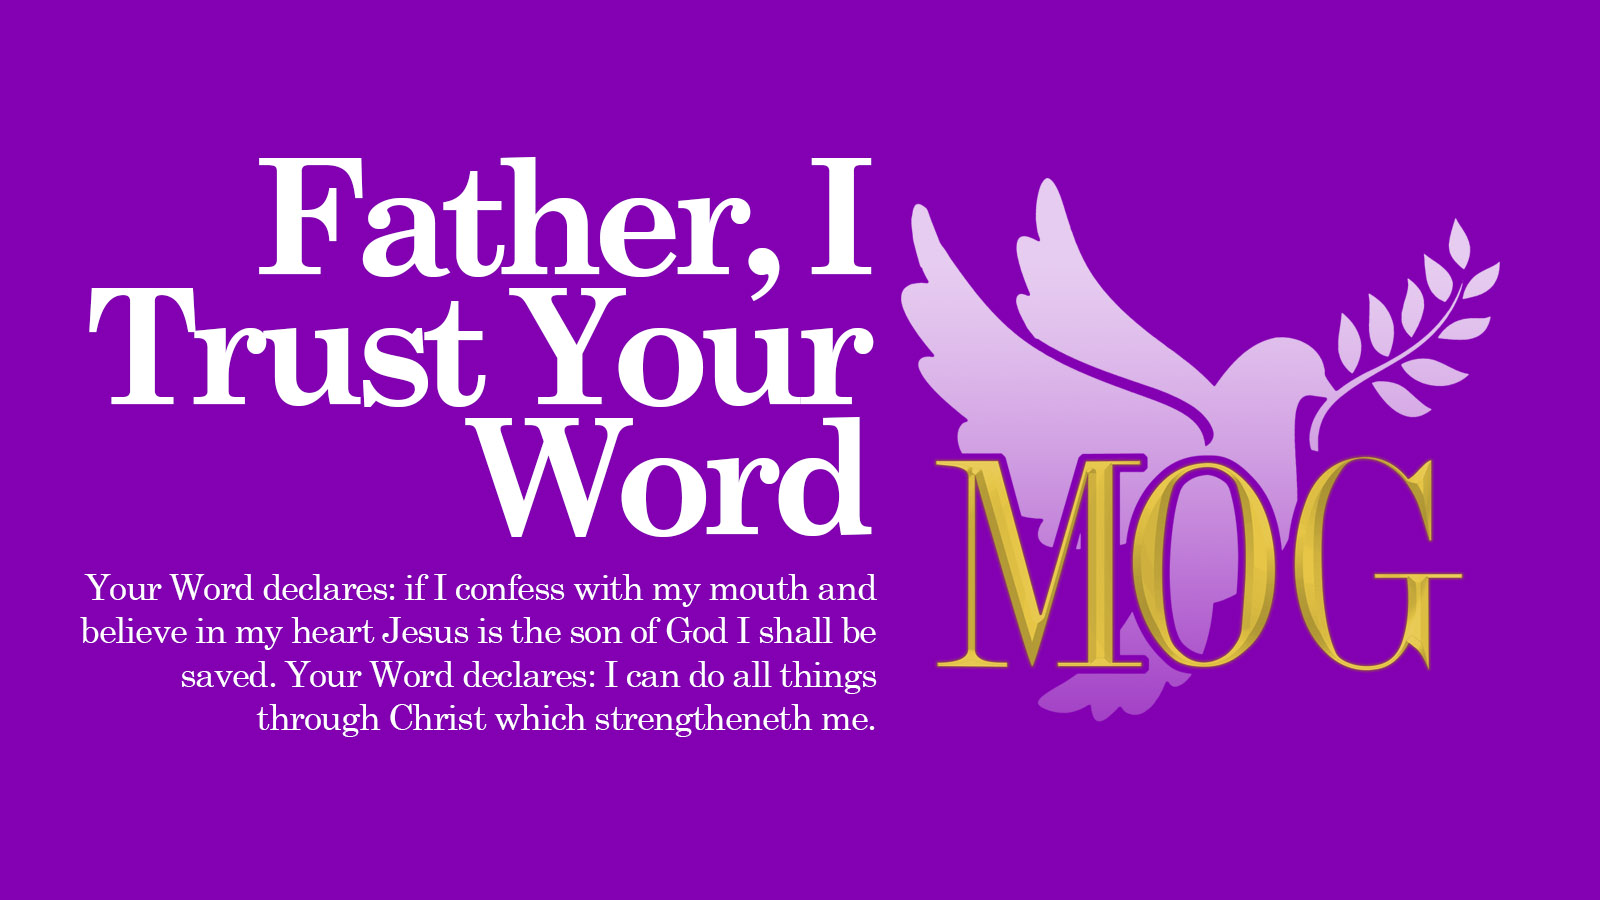 <h2>Father, I Trust Your Word</h2> <p>Your Word declares: if I confess with my mouth and believe in my heart Jesus is the son of God I shall be saved. Your Word declares: I can do all things through Christ which strengtheneth me.</p>